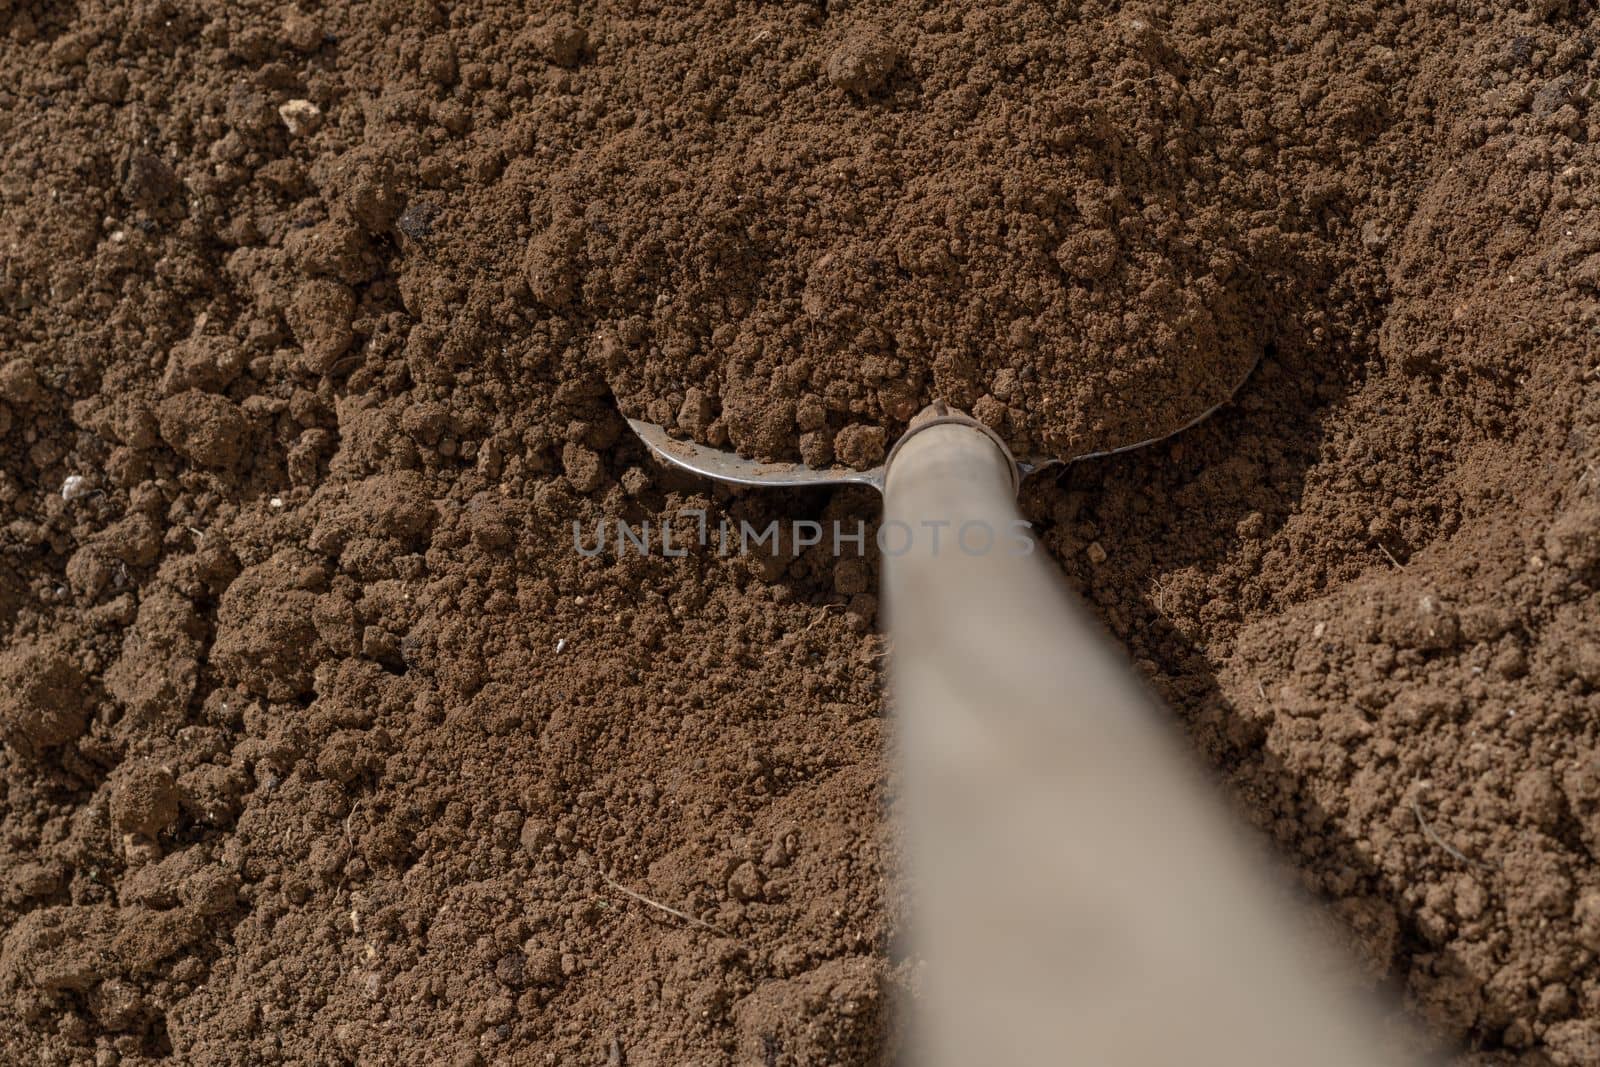 close-up of a shovel digging the soil of a vegetable garden